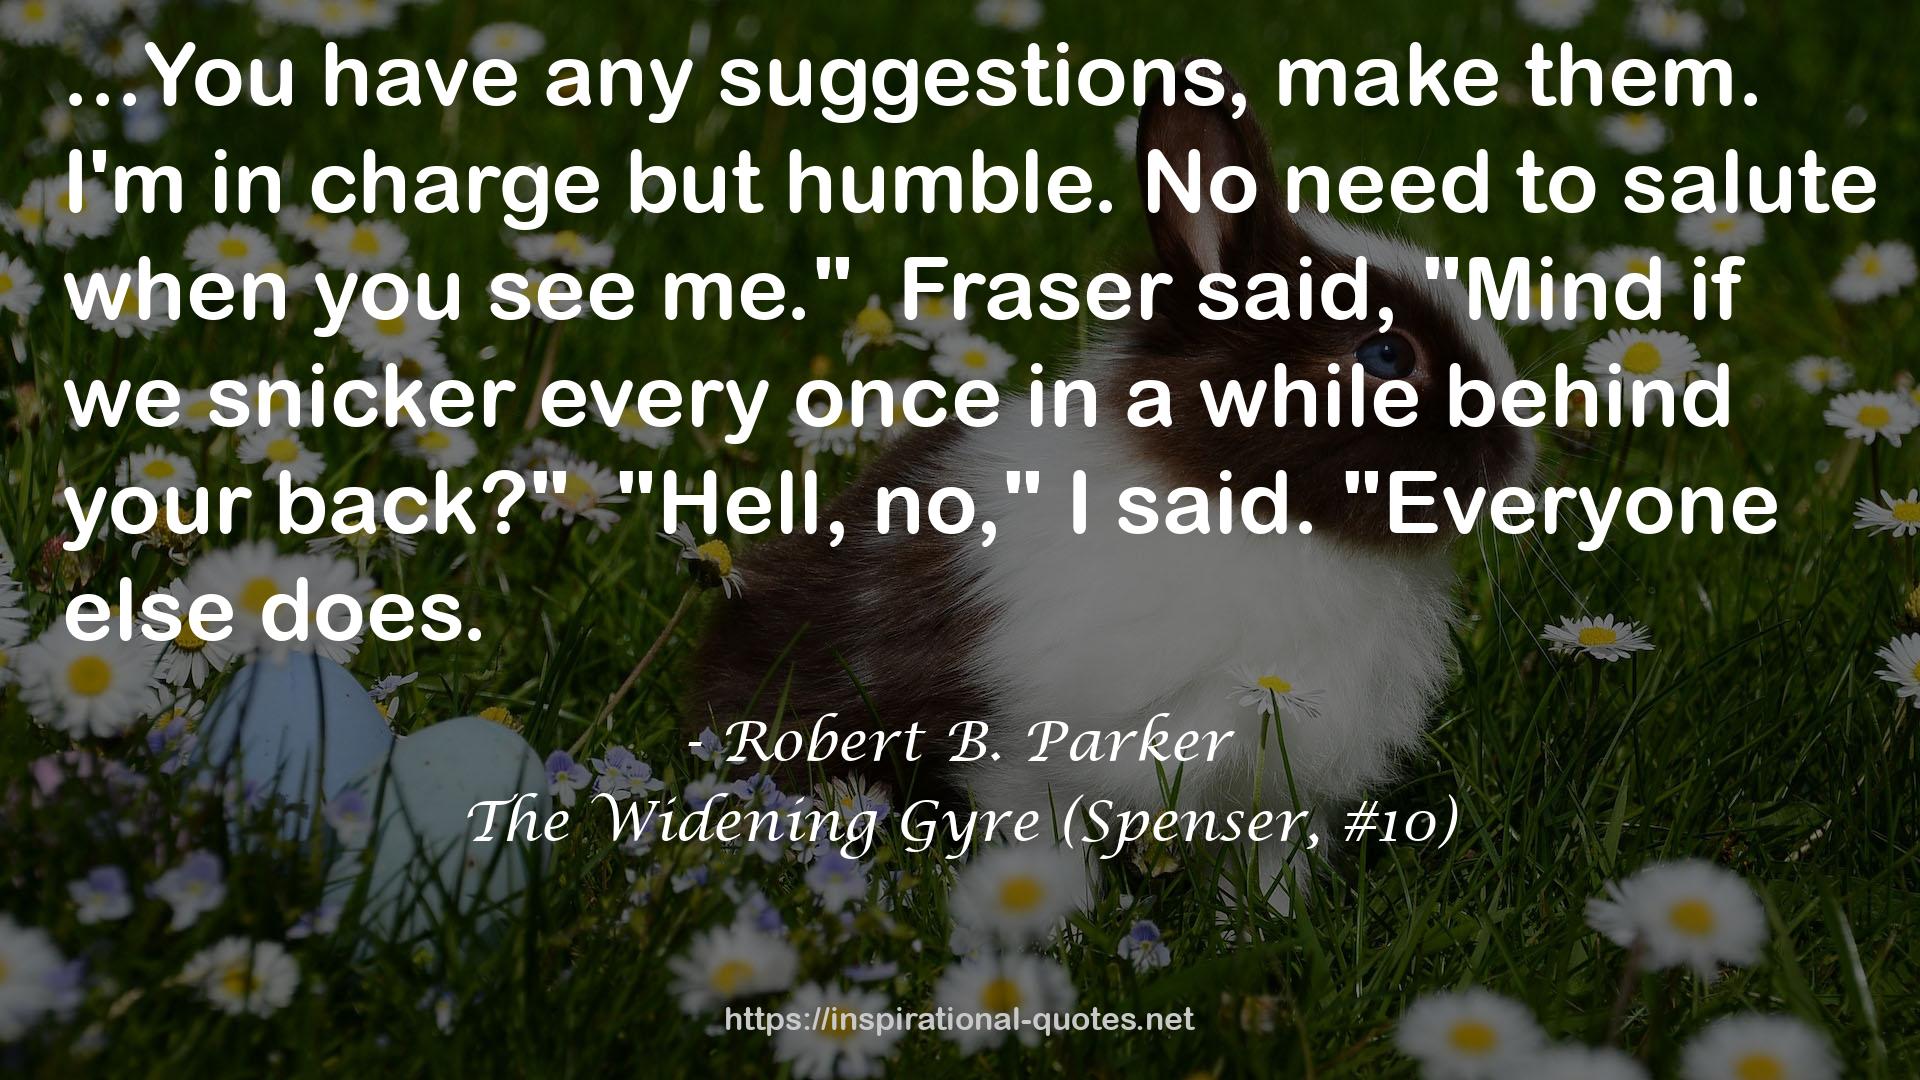 The Widening Gyre (Spenser, #10) QUOTES